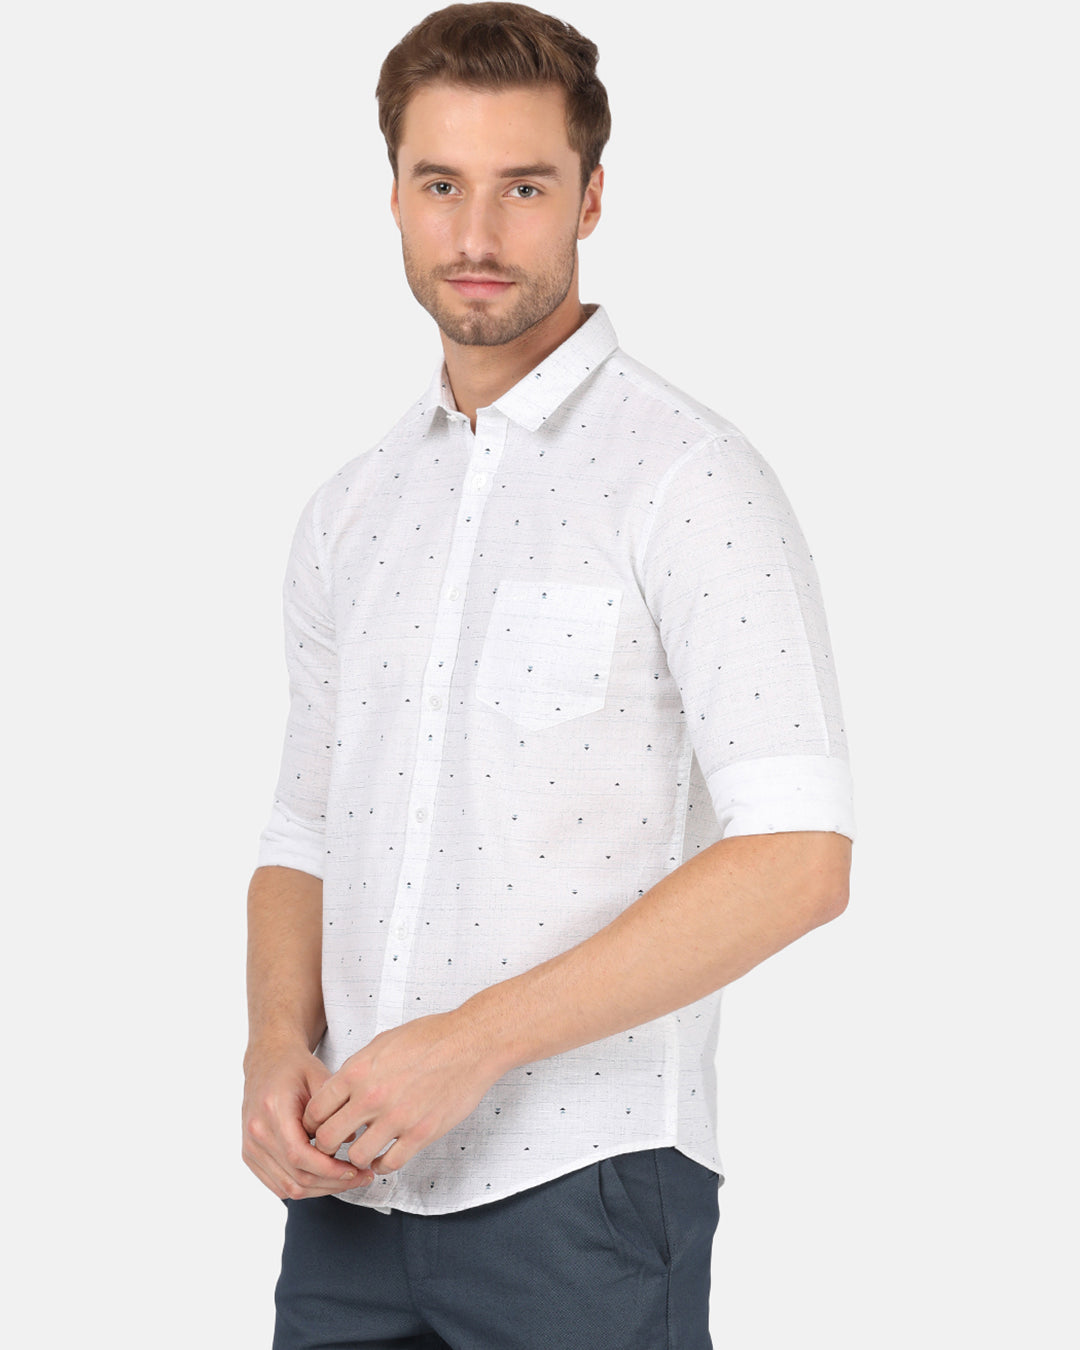 Crocodile Men's Casual Full Sleeve Slim Fit Printed White with Collar Shirt